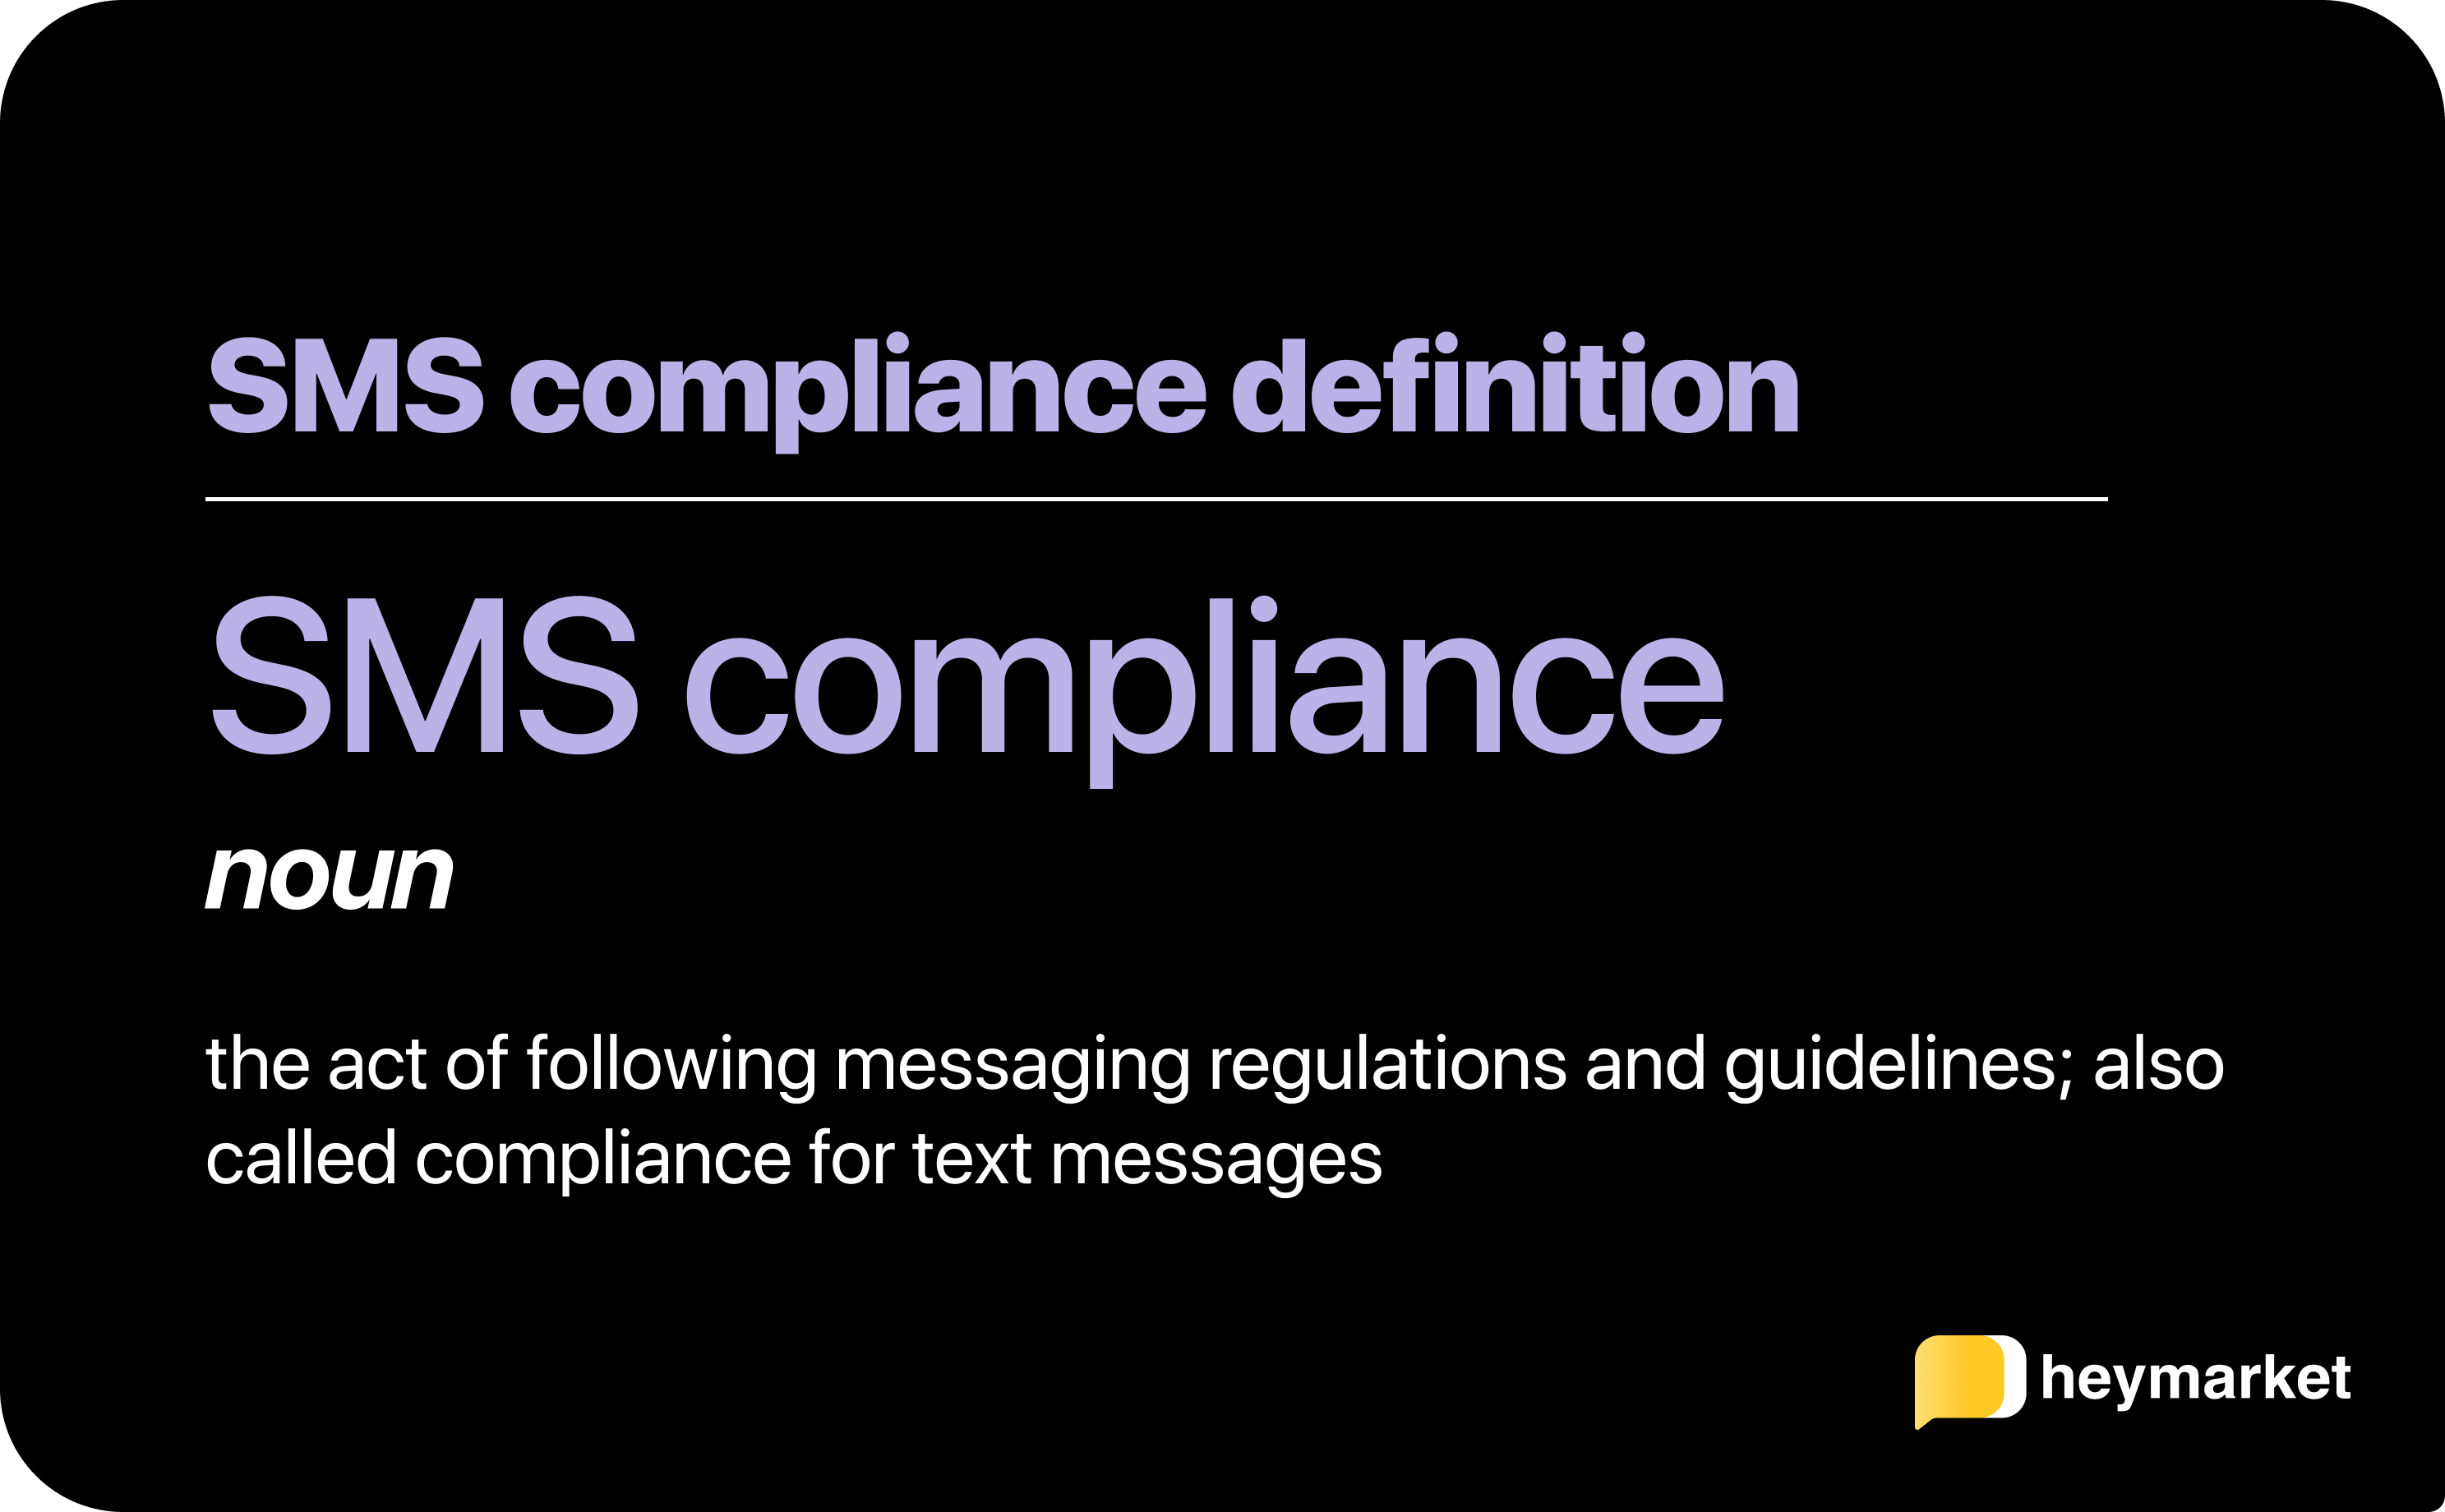 SMS compliance is the act of following messaging regulations and guidelines; also called compliance for text messages